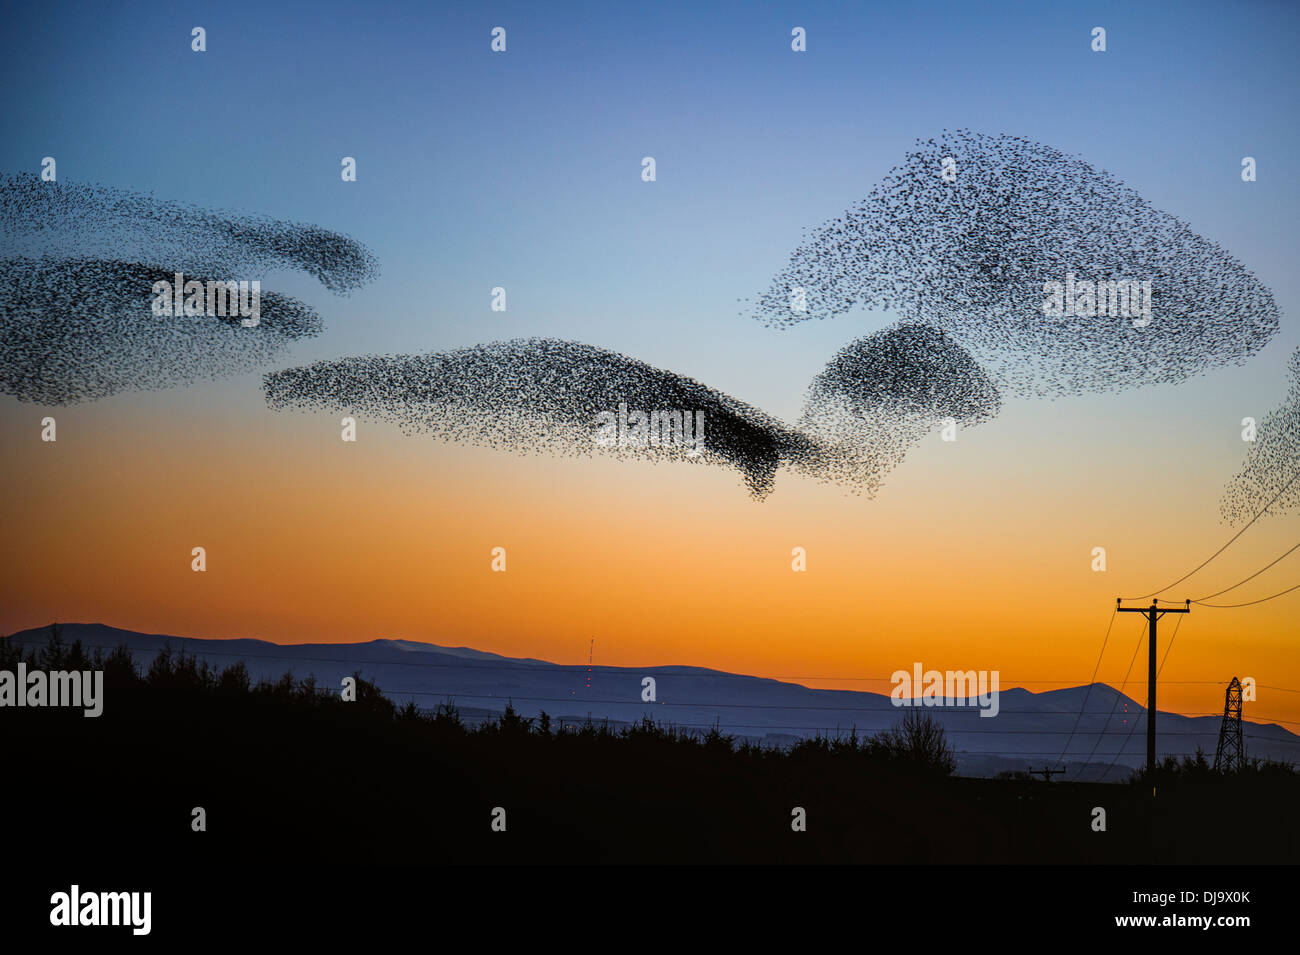 A starling murmuration or flock flying in an aerobatic display near Gretna, Scotland prior to roosting in November 2013. Stock Photo